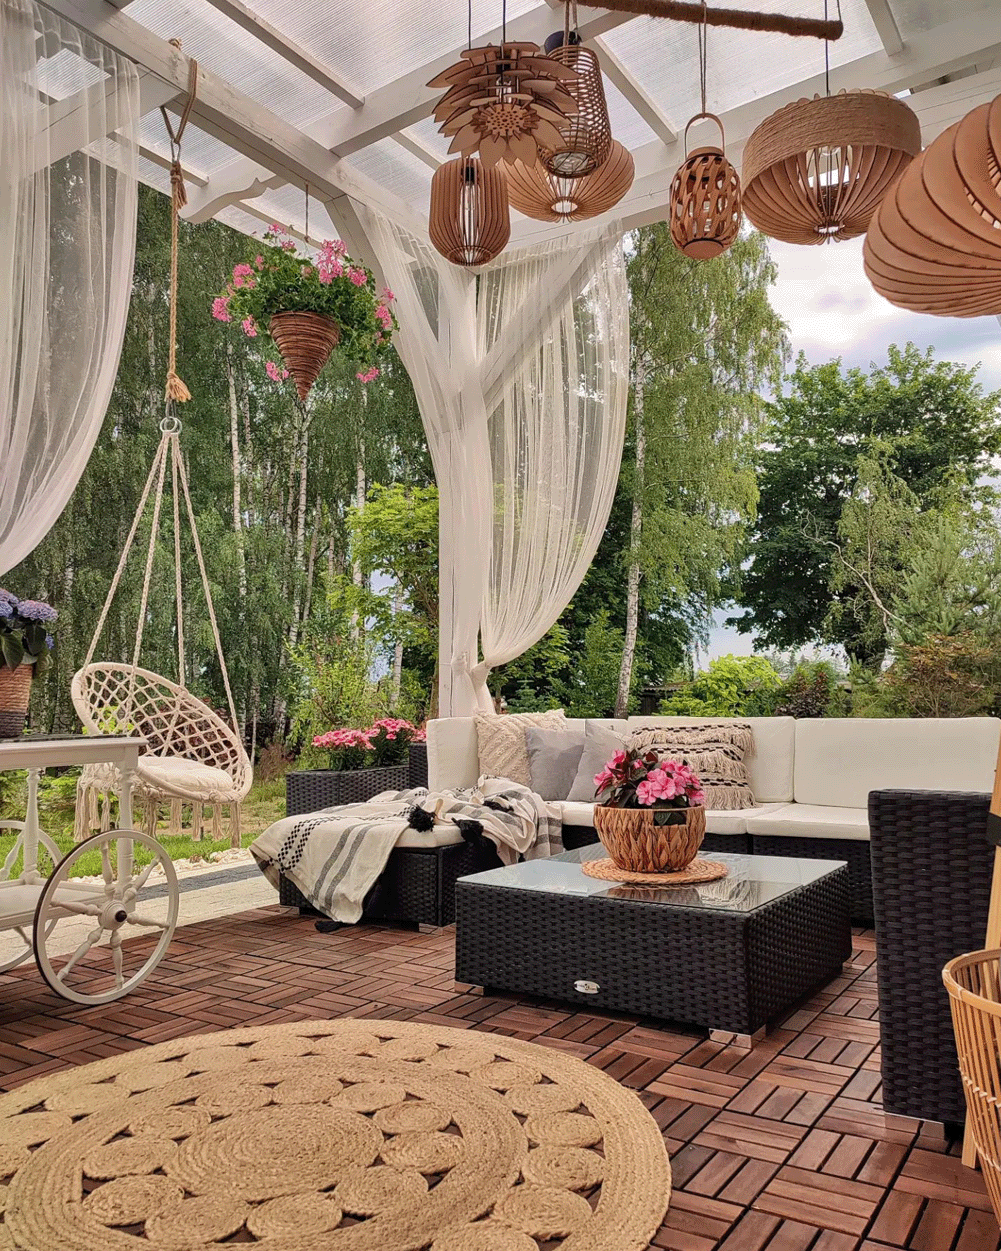 Bohemian patio with hanging lights and curtains